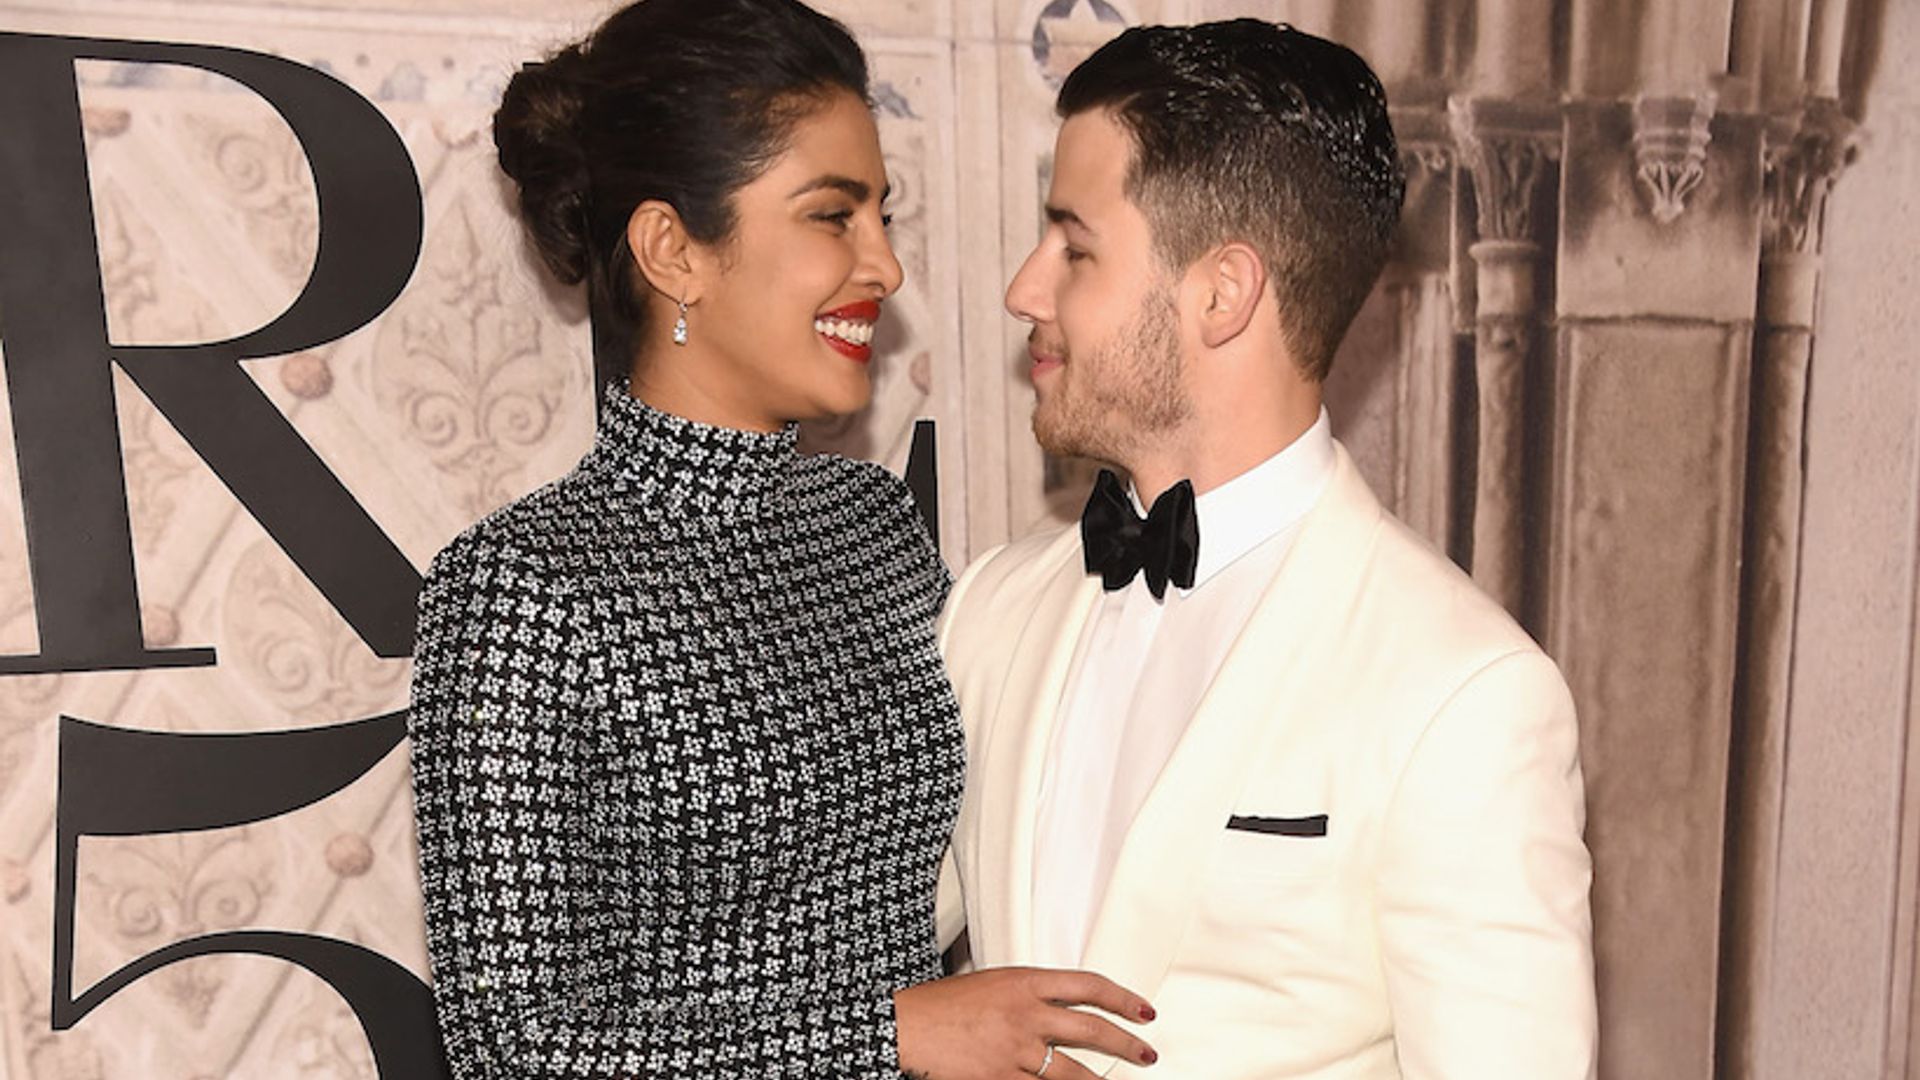 Exclusive: Priyanka Chopra and Nick Jonas marry in spectacular ceremony in India